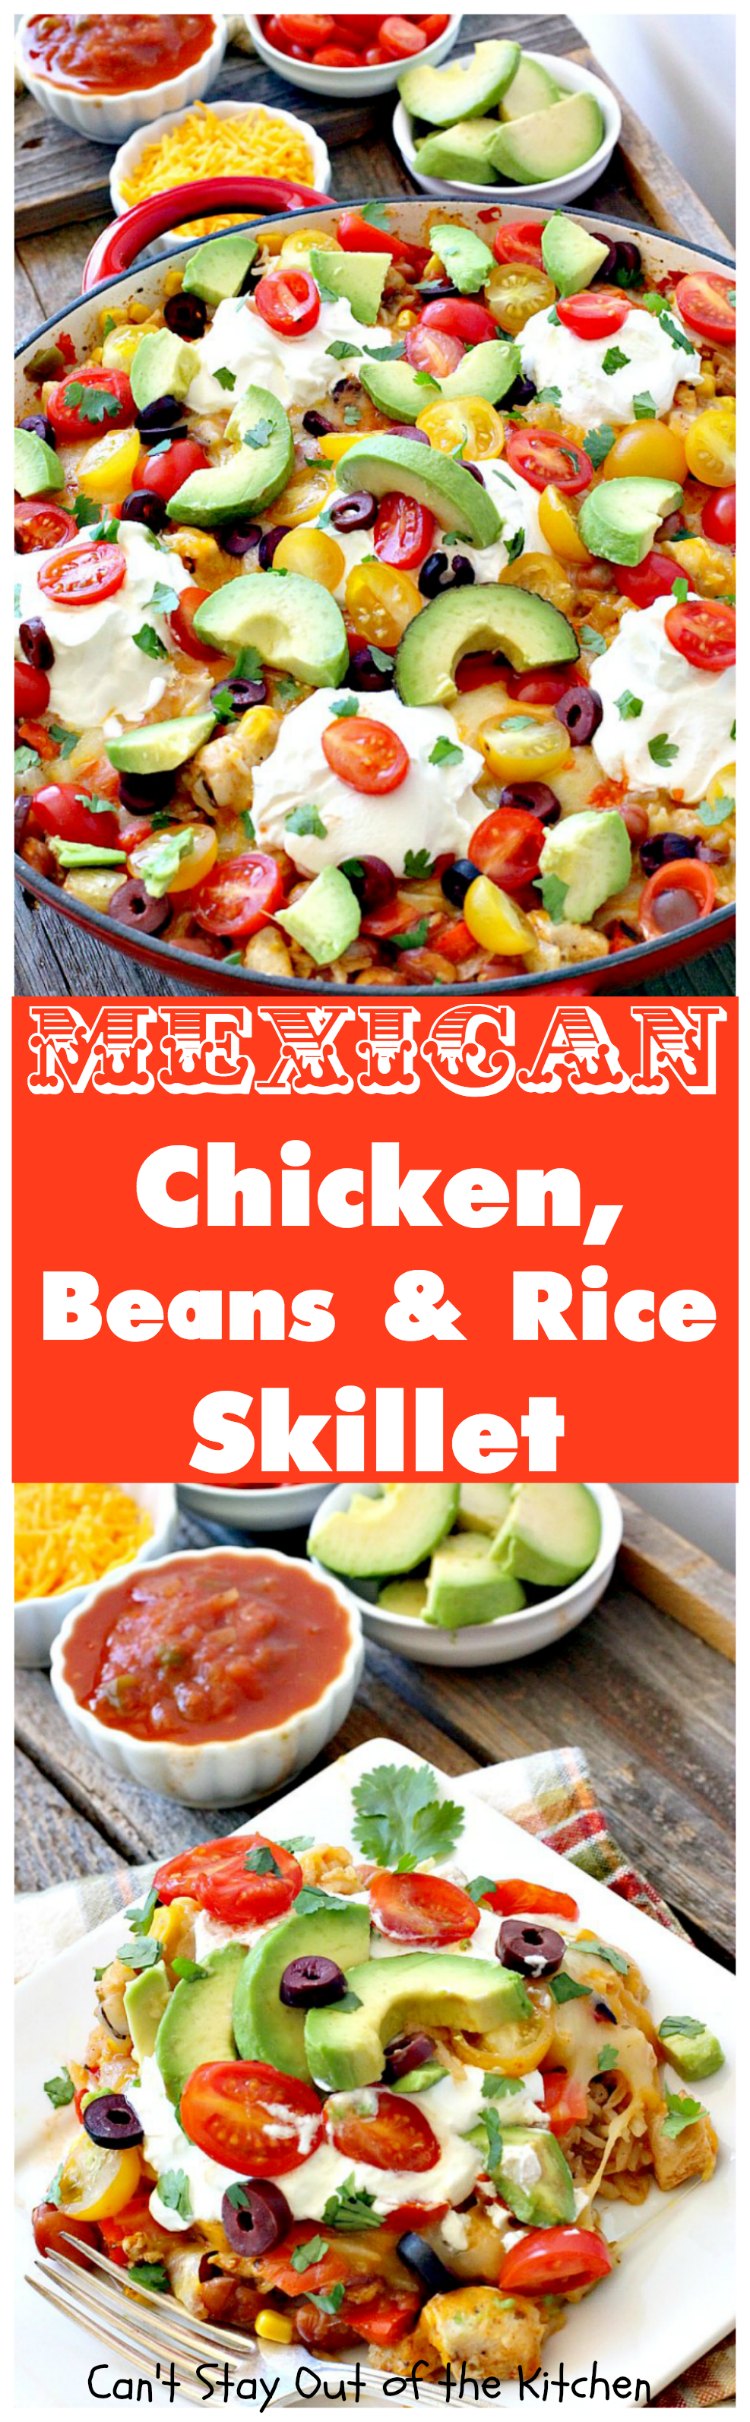 Mexican Chicken, Beans and Rice Skillet | Can't Stay Out of the Kitchen | this fantastic one-dish #TexMex skillet entree is one of the BEST you'll ever eat. Ready in about 40 minutes so it's perfect for weeknight meals. #chicken #glutenfree #avocados